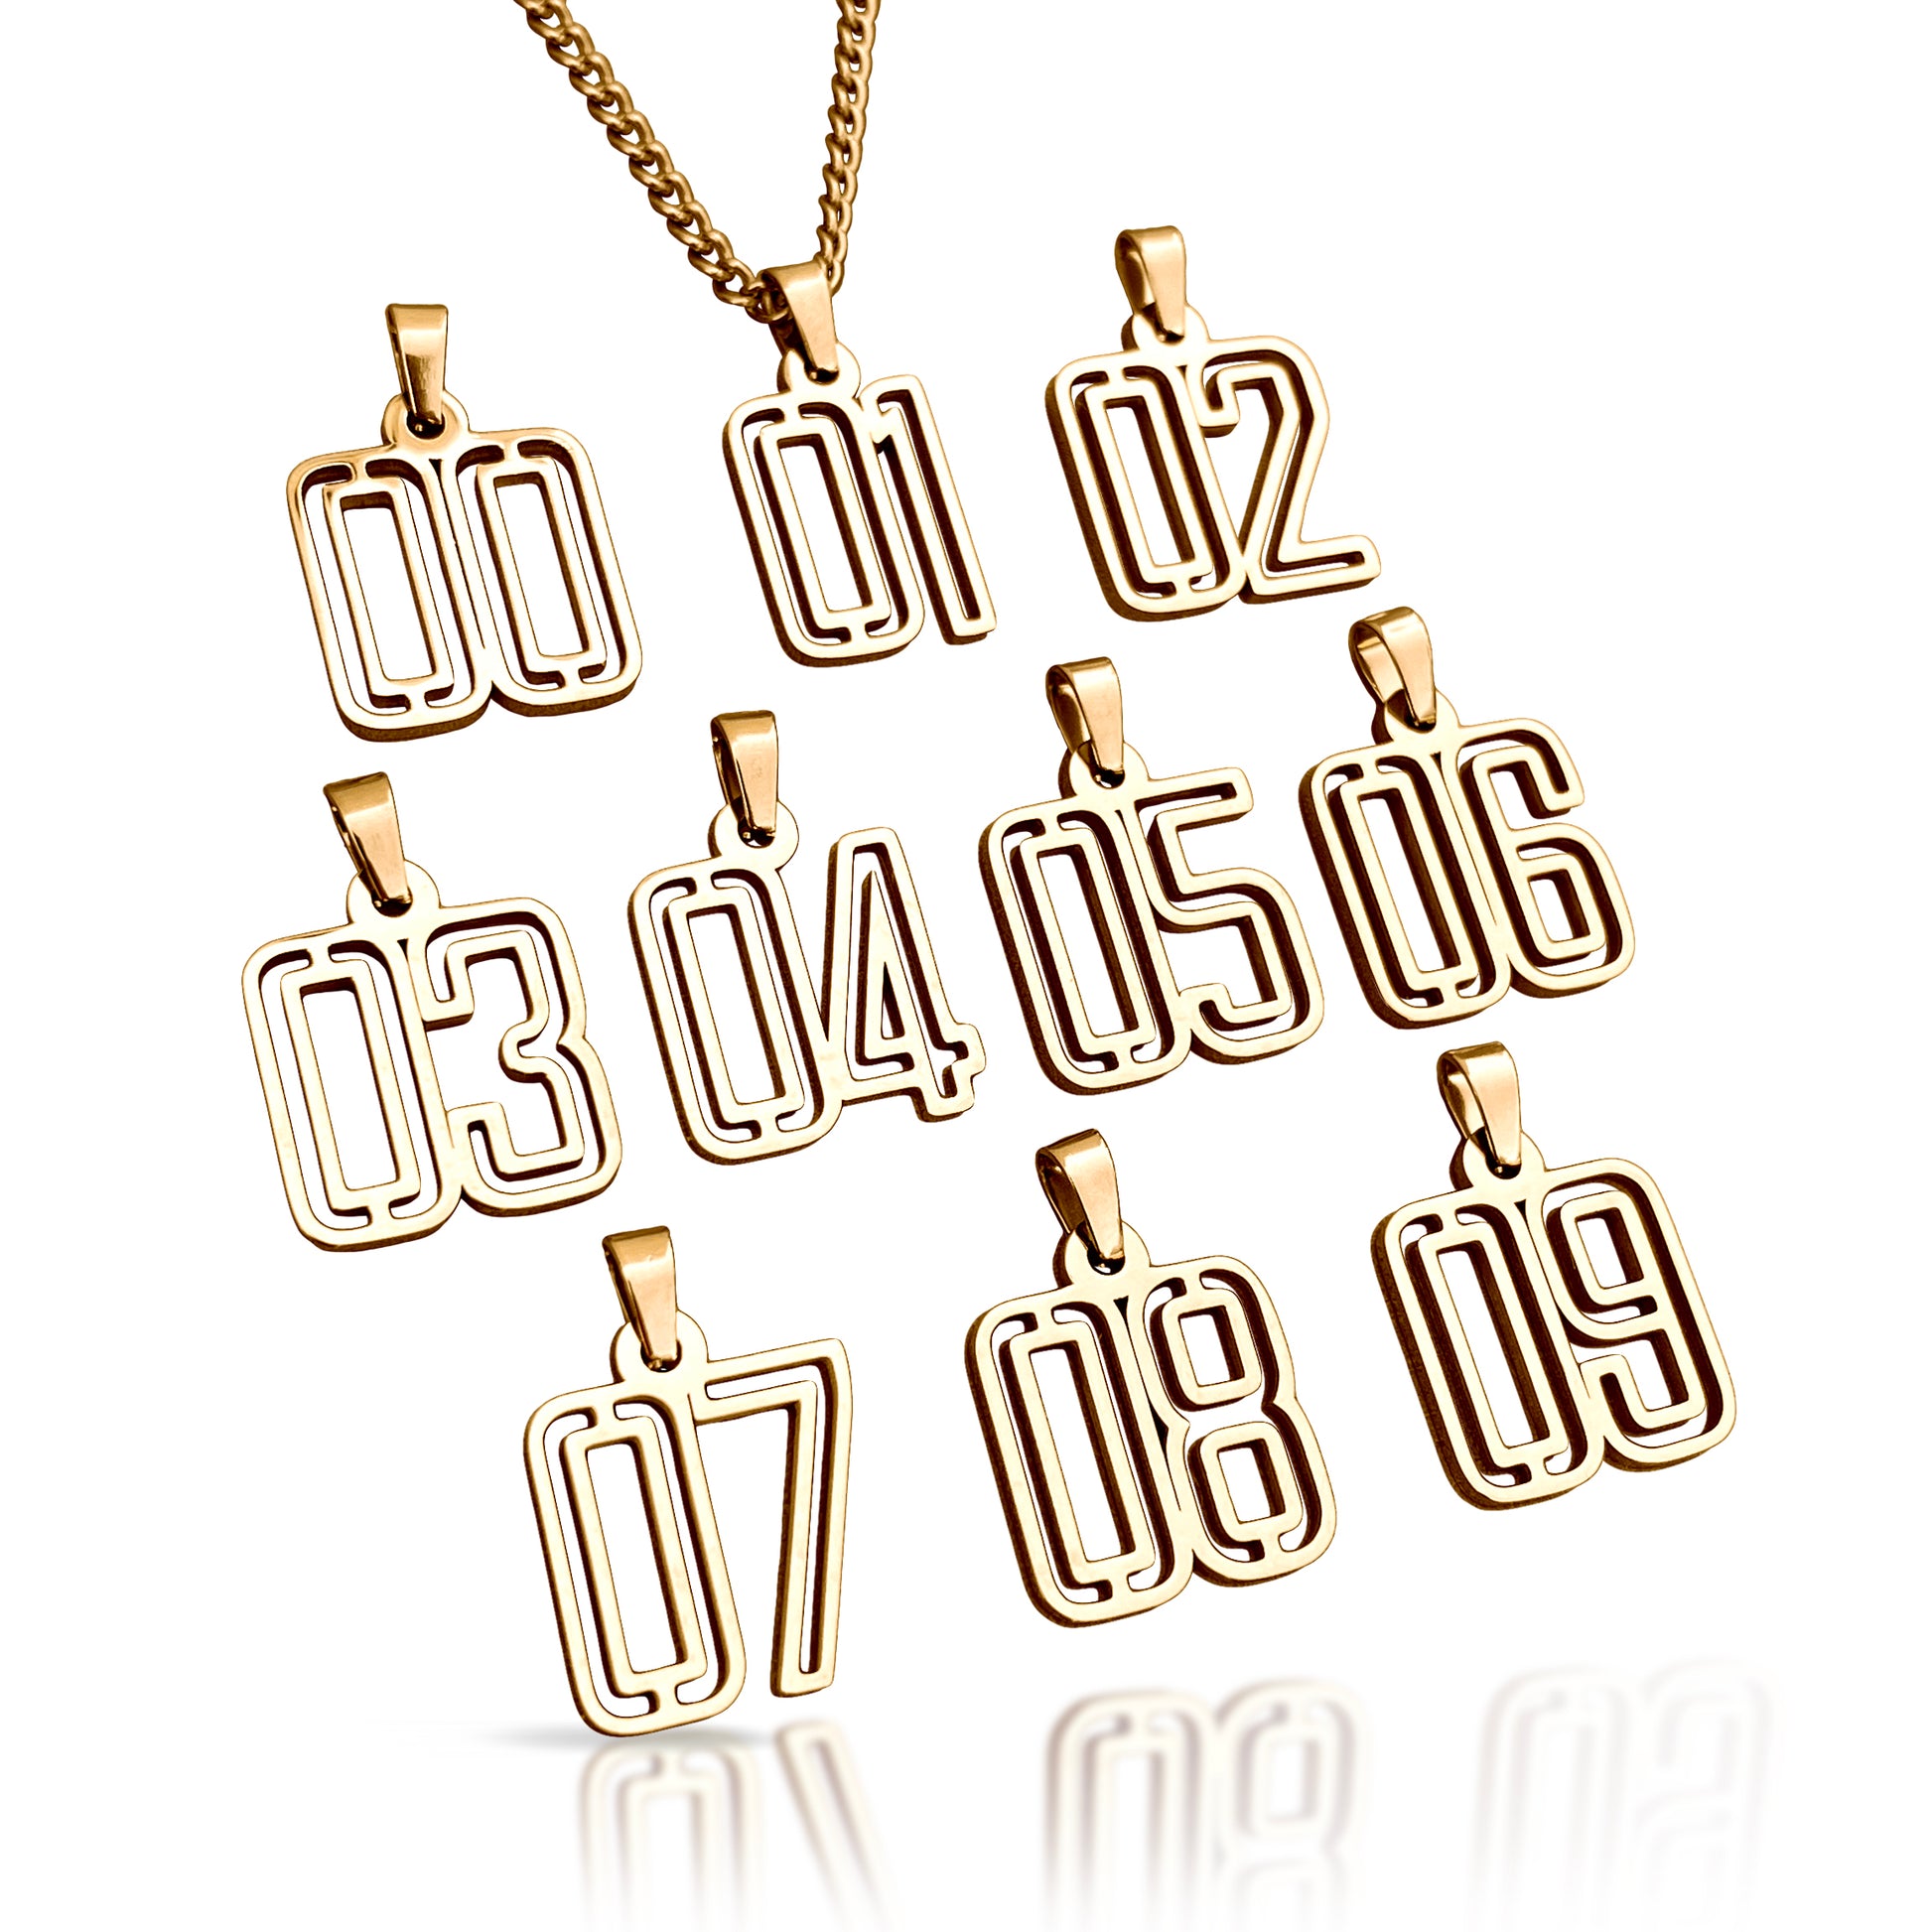 00-09 Varsity Number Pendants With Chain Necklace - 14K Gold Plated Stainless Steel